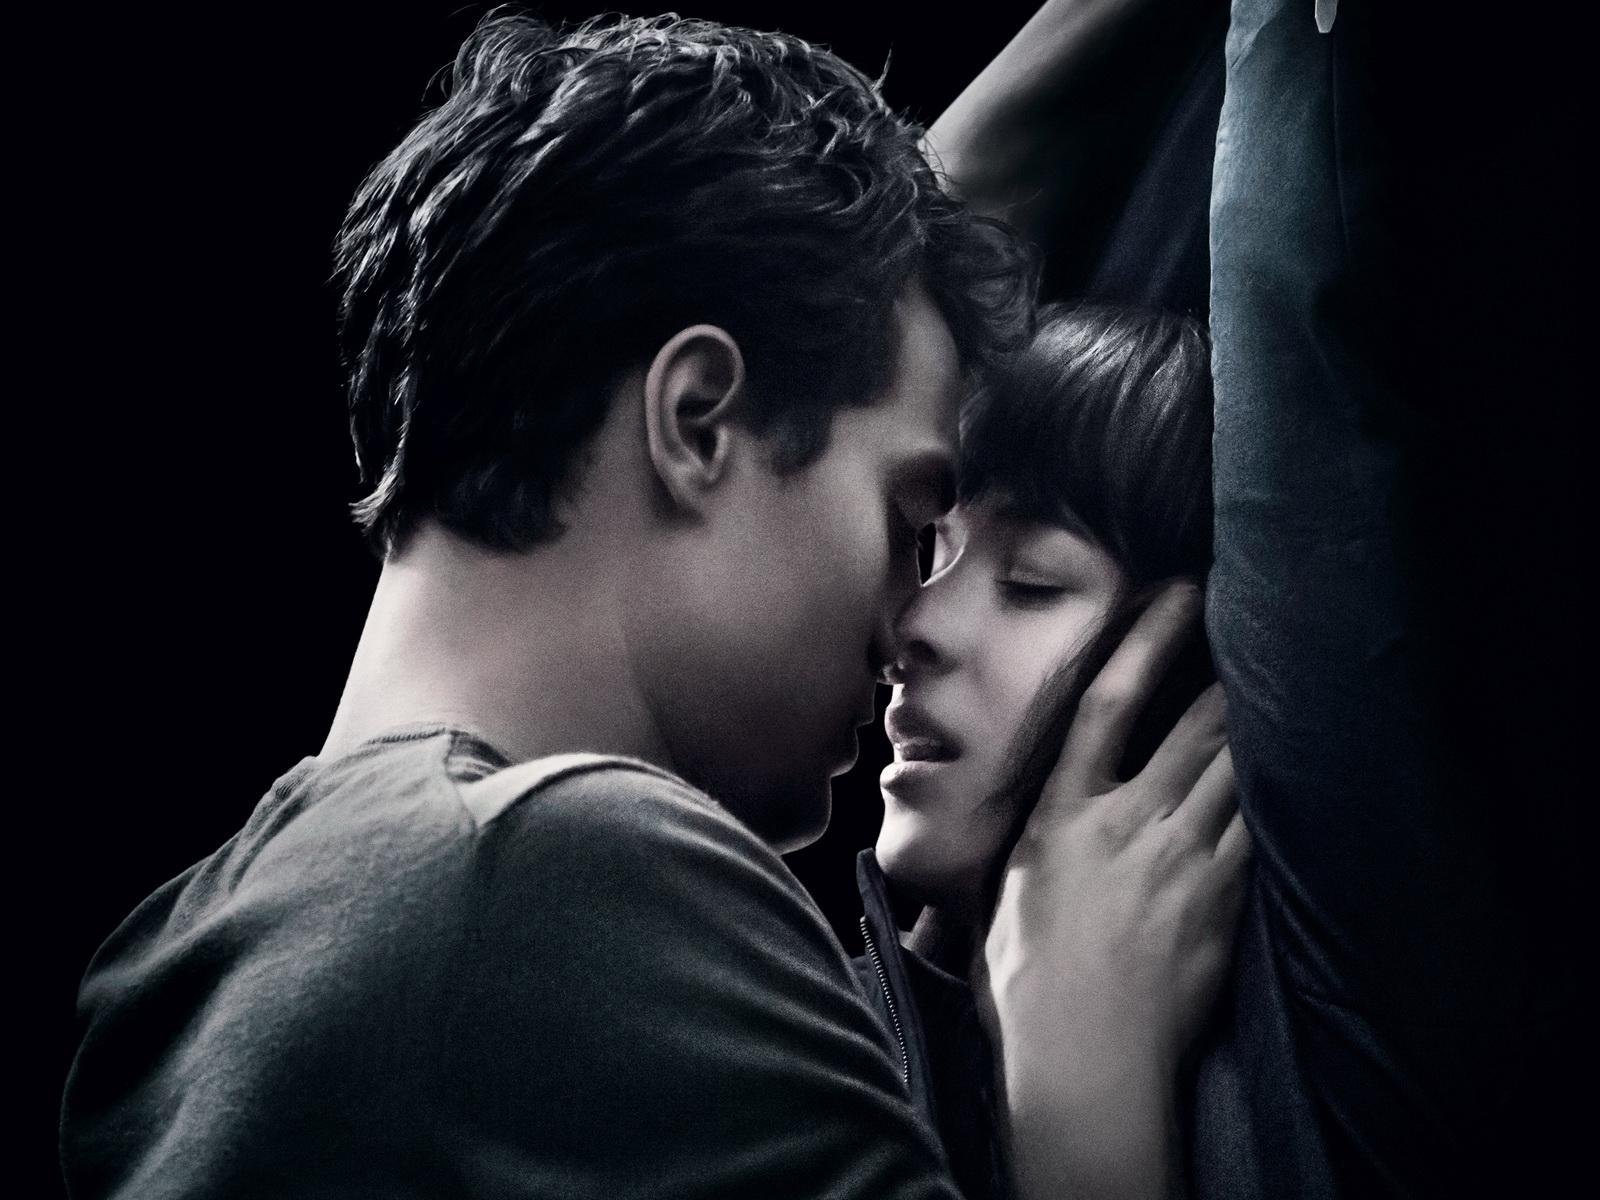 fifty shades of grey dubbed movie download